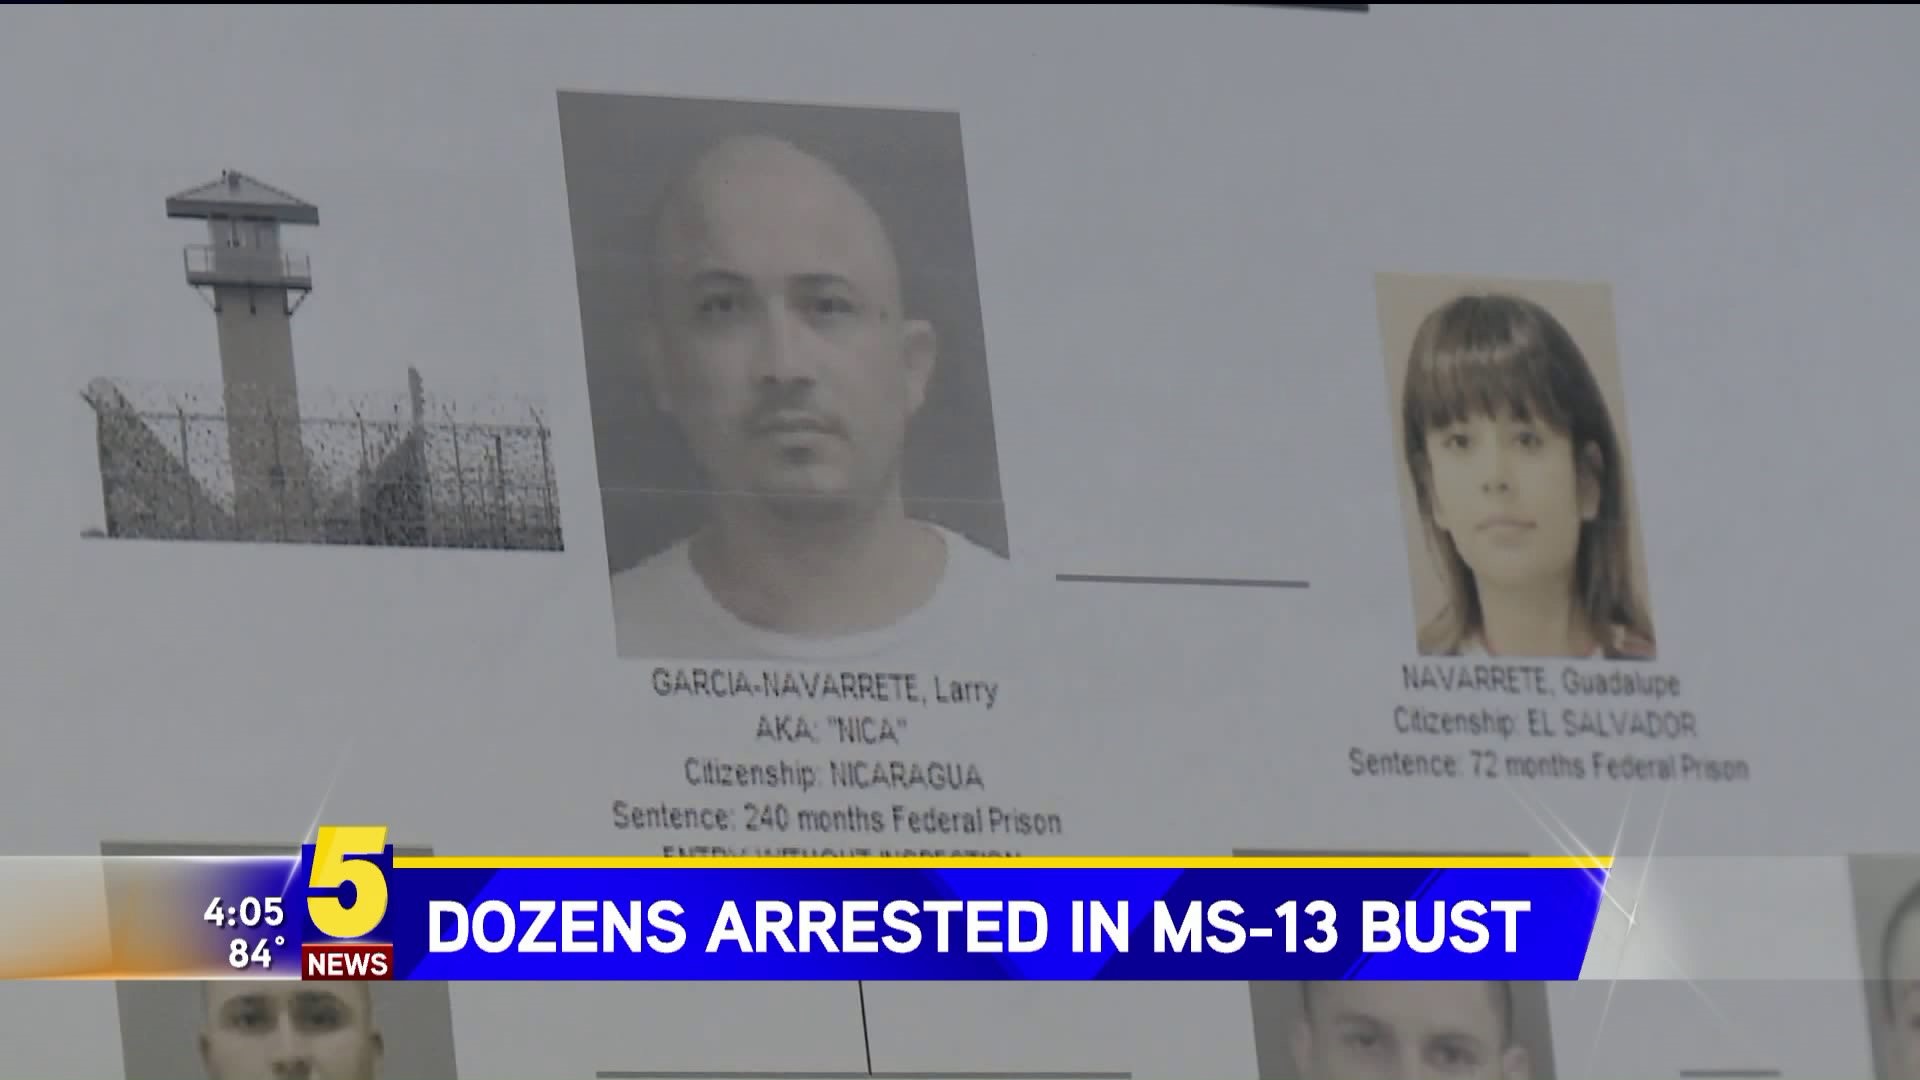 Dozens Arrested In MS-13 Bust